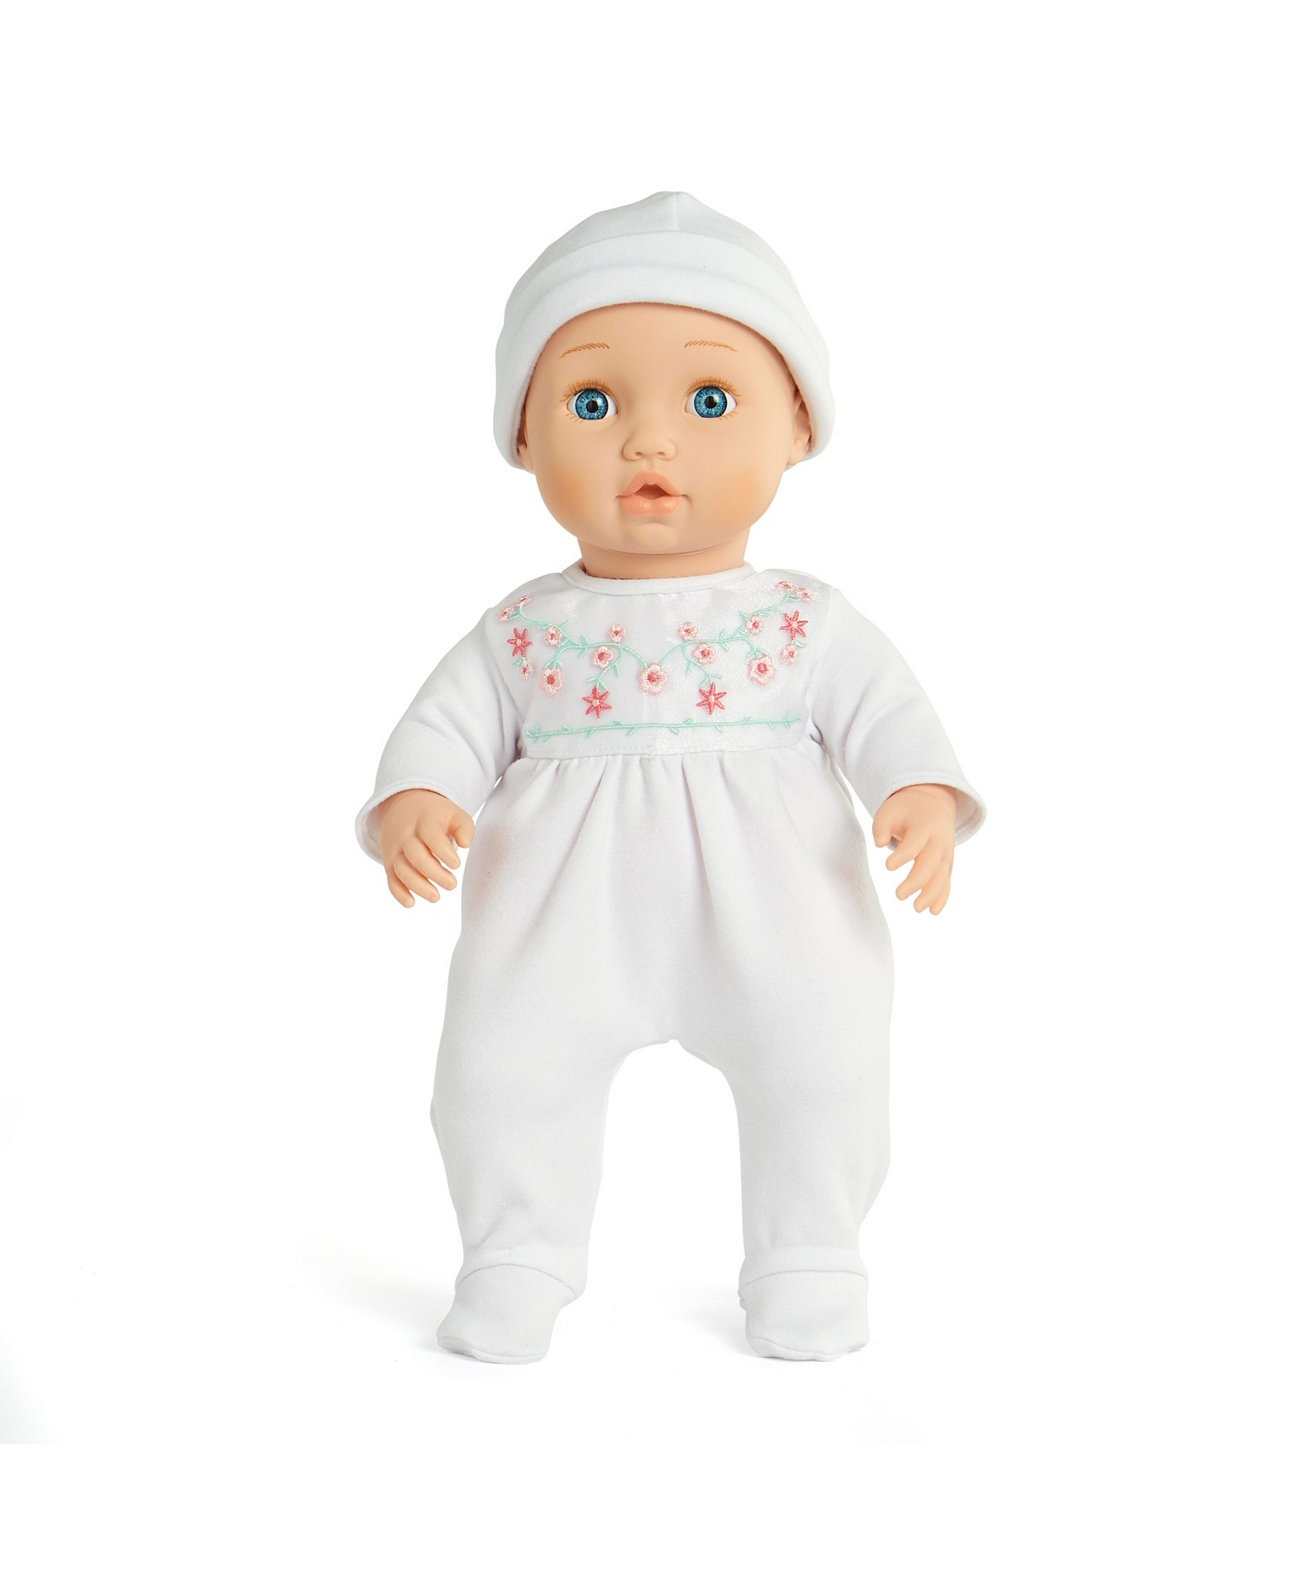 Baby So Sweet Nursery Doll with White Outfit You & Me